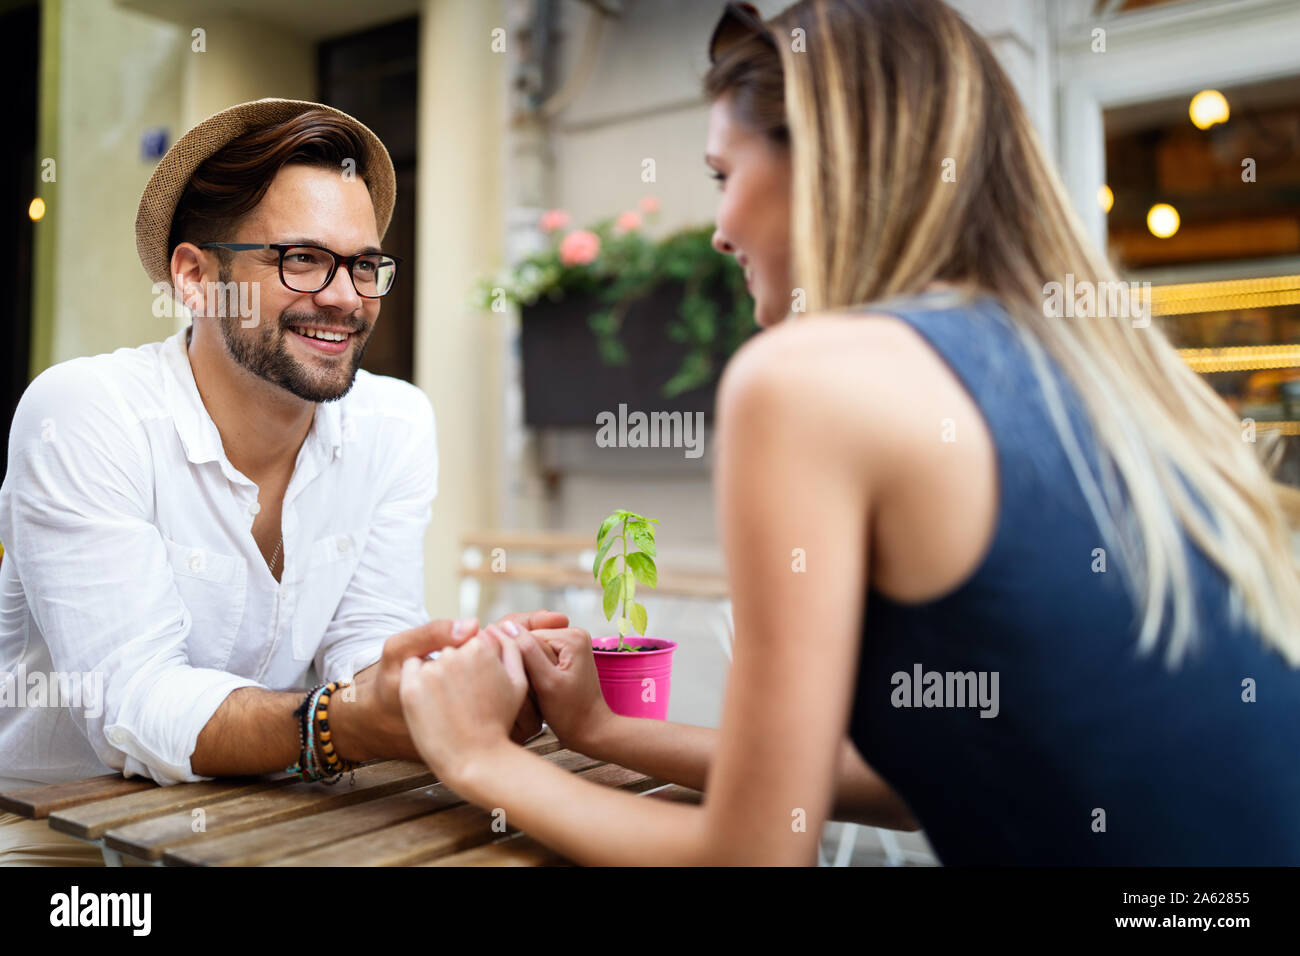 Young couple talking on a date. Loving couple having fun at a restaurant. Stock Photo